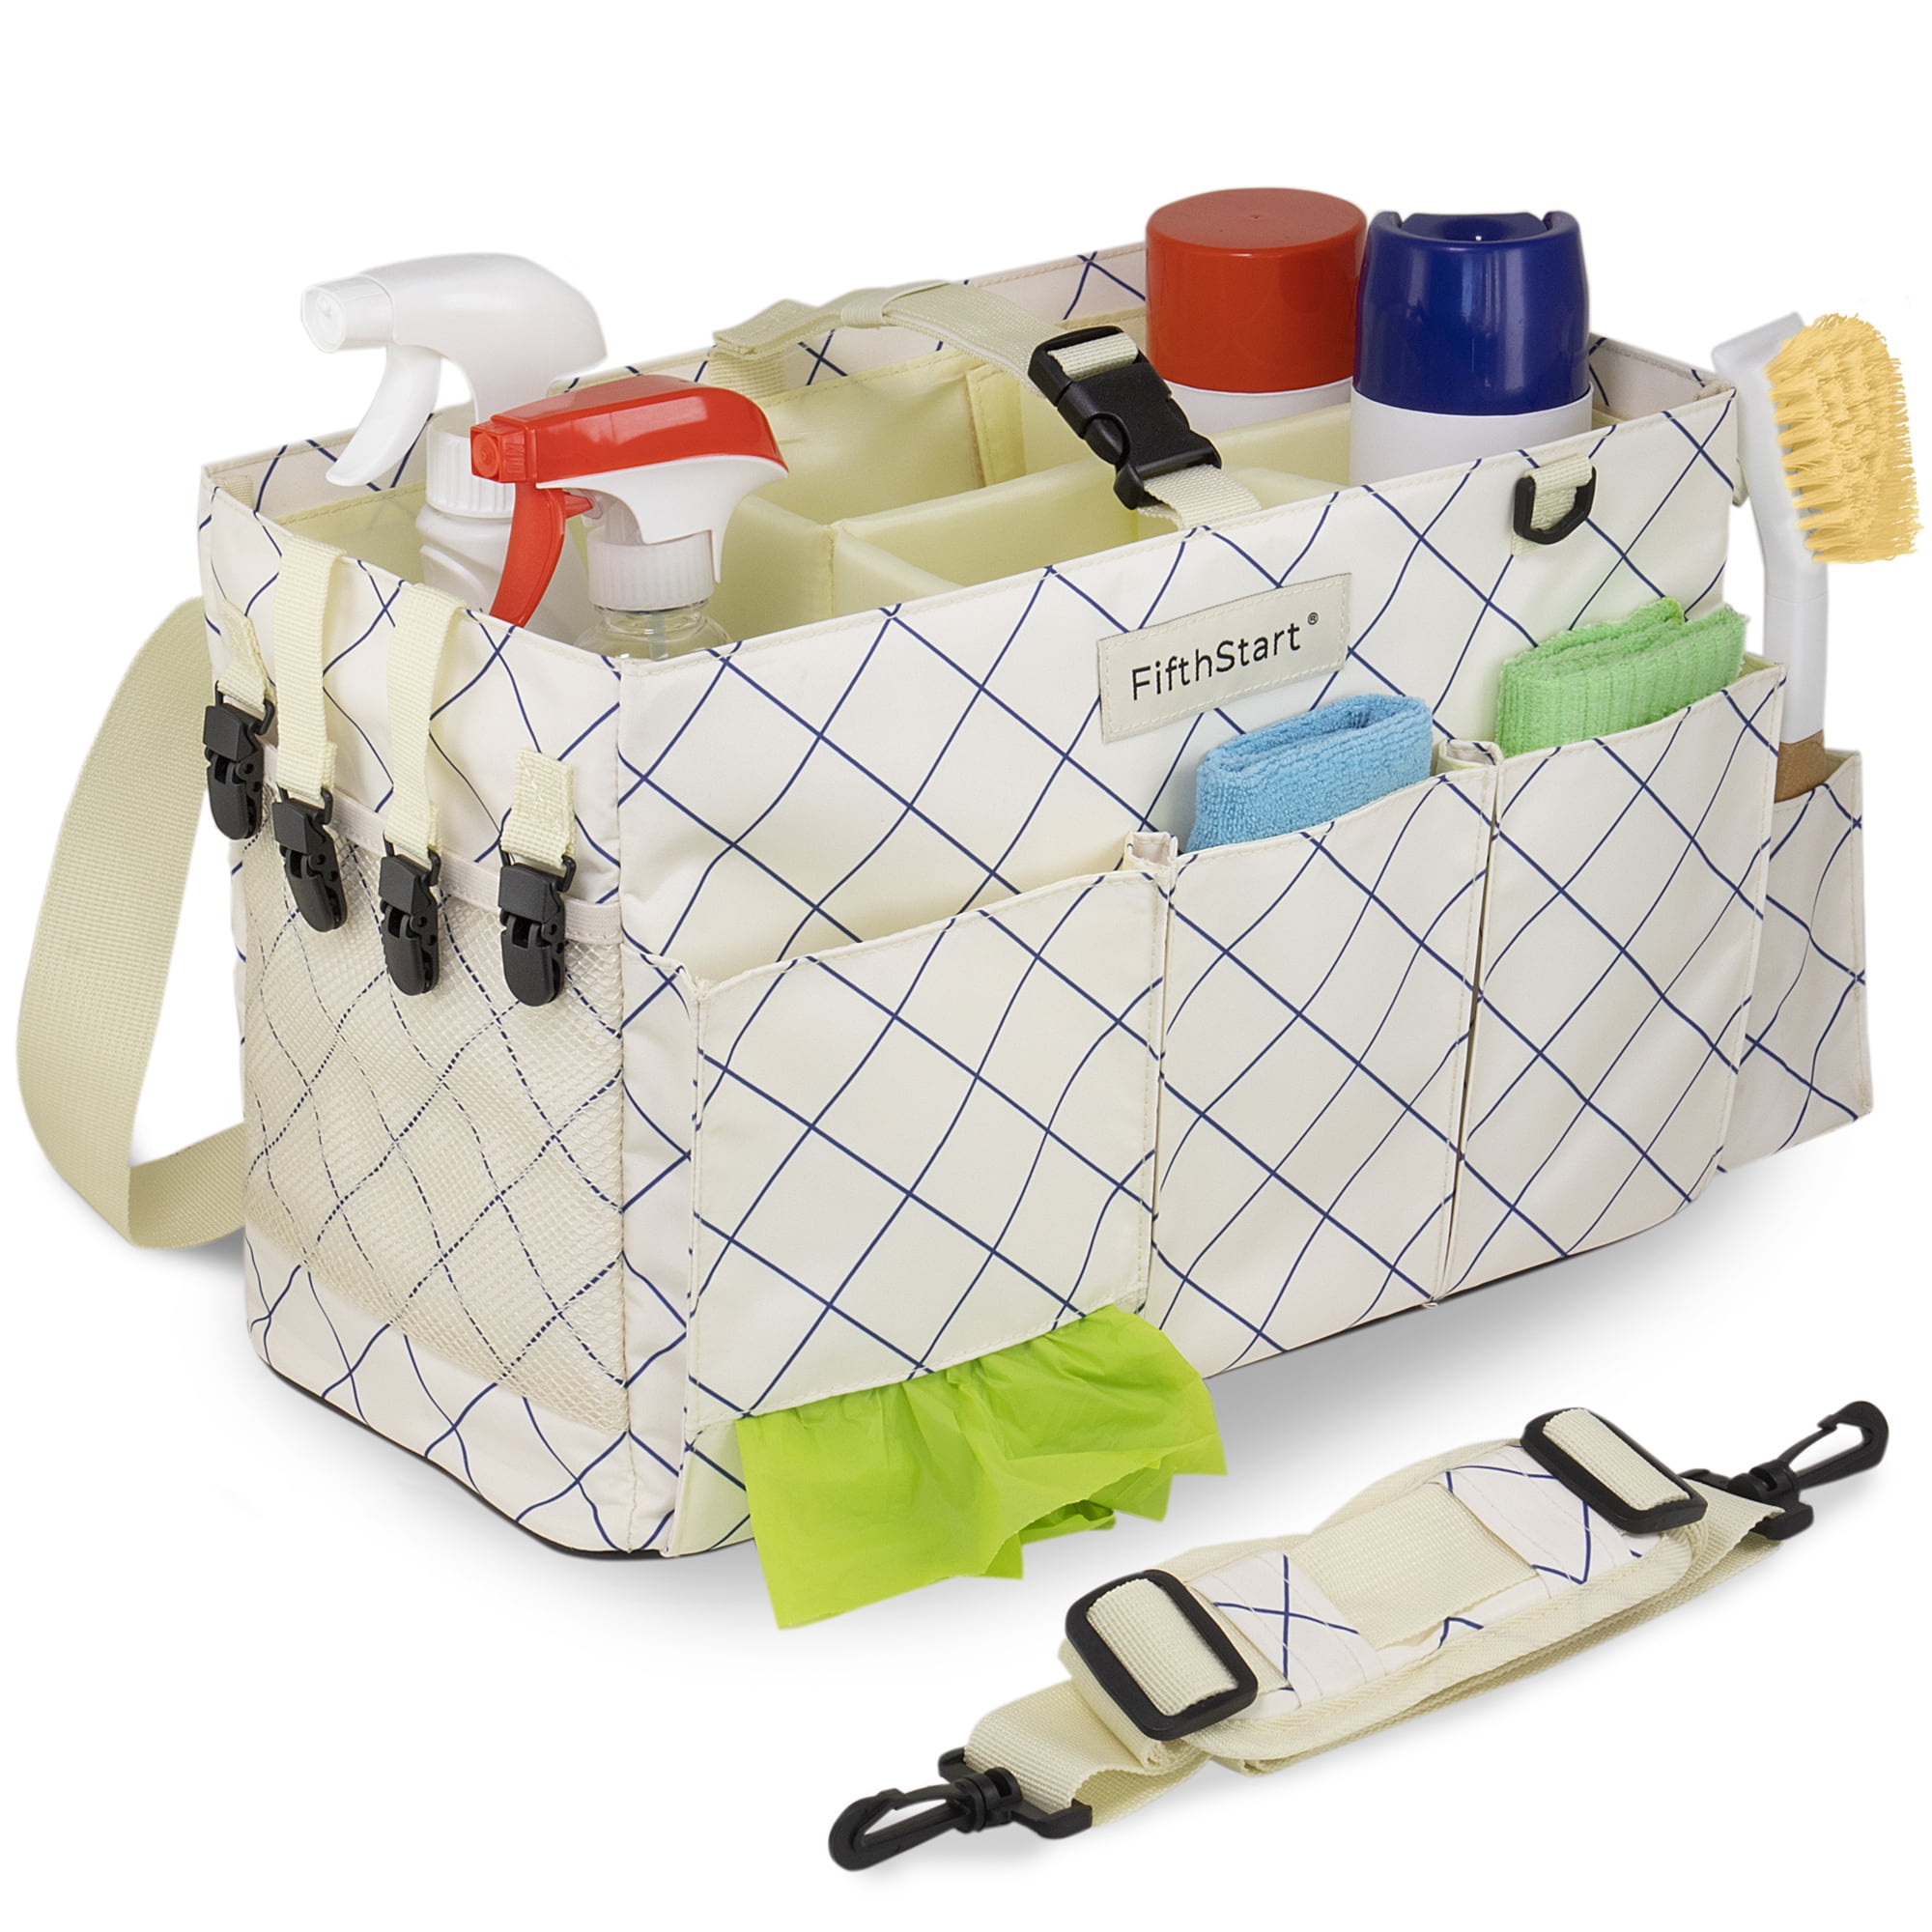 Storage Standard Cleaning Caddy Organizer Wearable with Handles